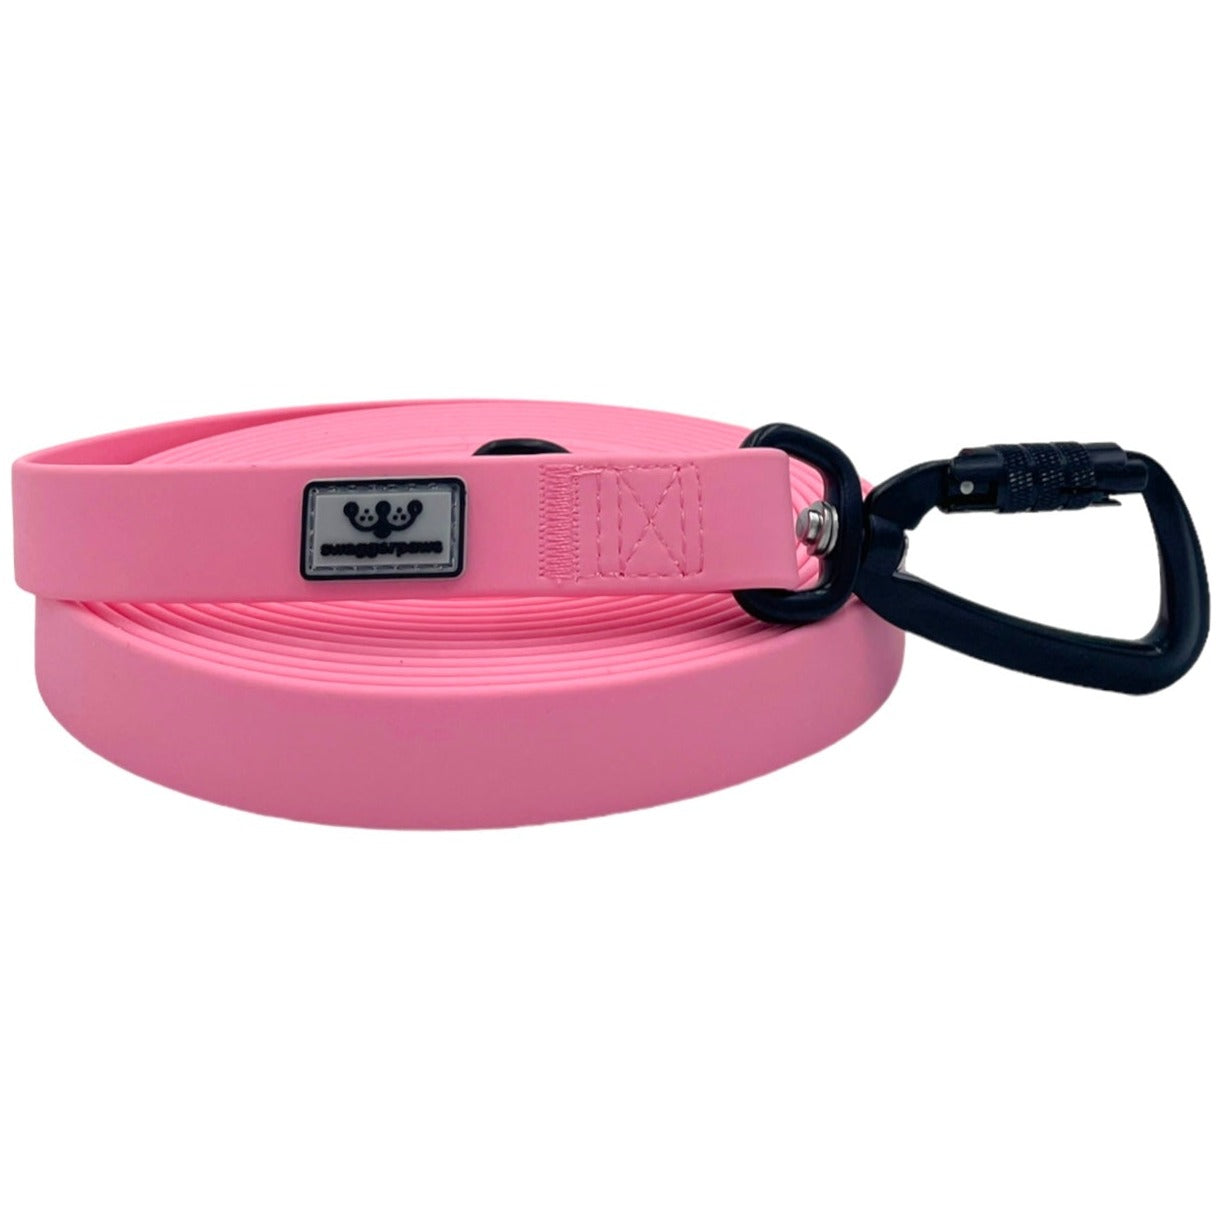 SwaggerPaws waterproof long line dog lead with auto-lock carabiner, flamingo pink